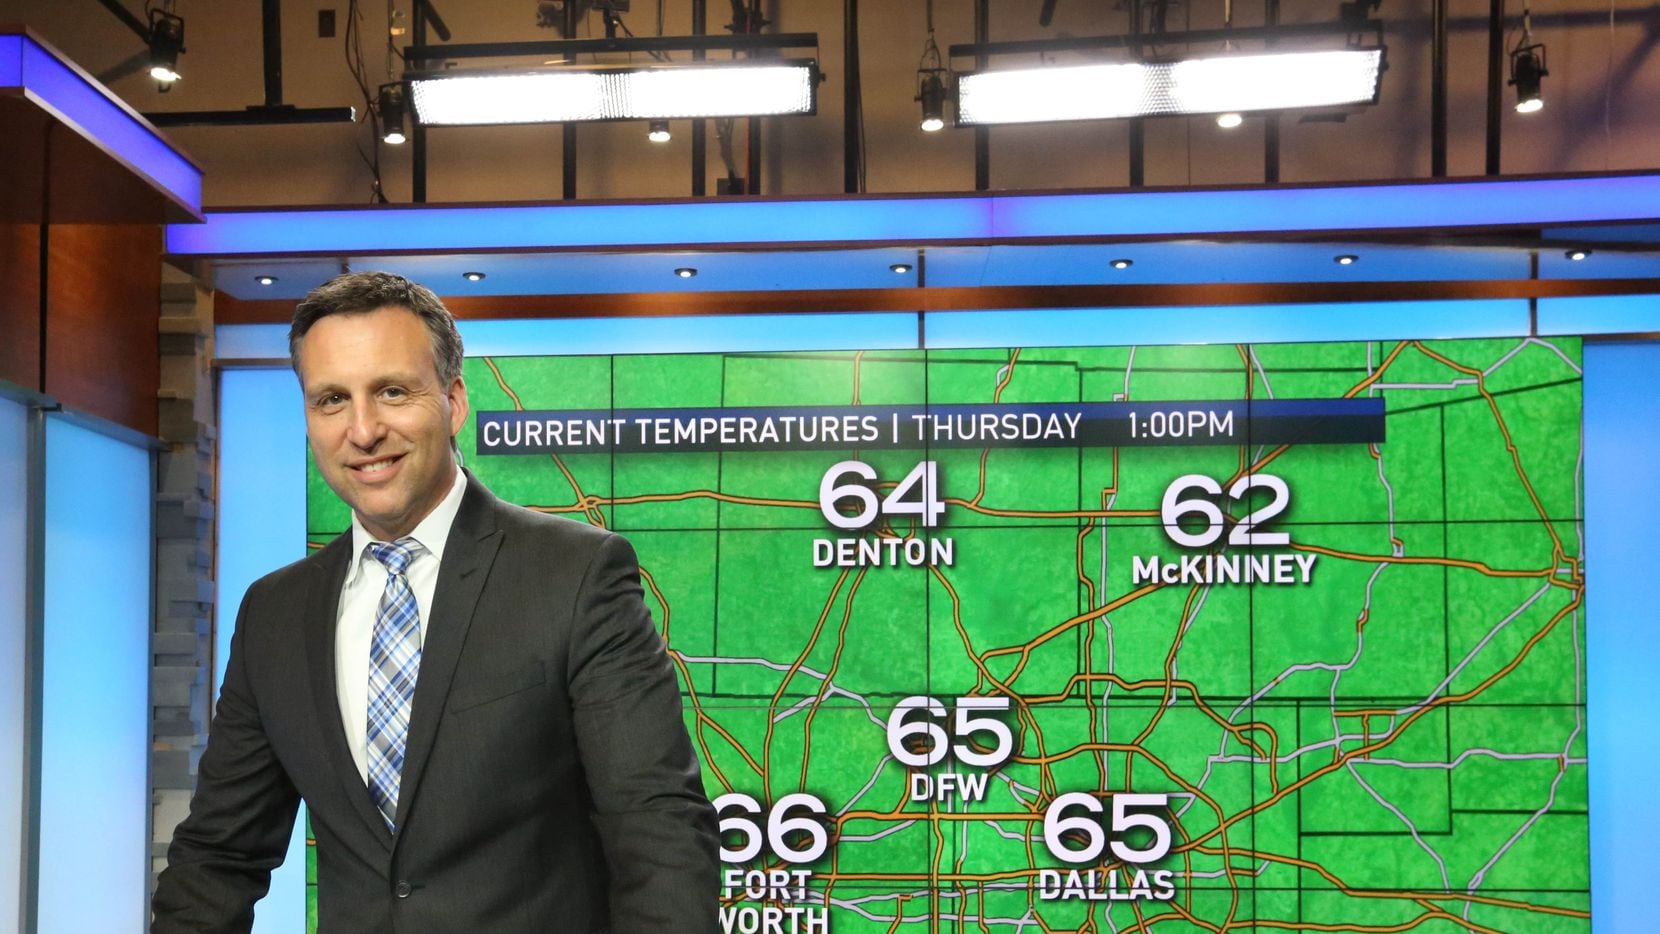 KXAS-TV (NBC5) meteorologist Rick Mitchell is pictured at the station in Fort Worth.